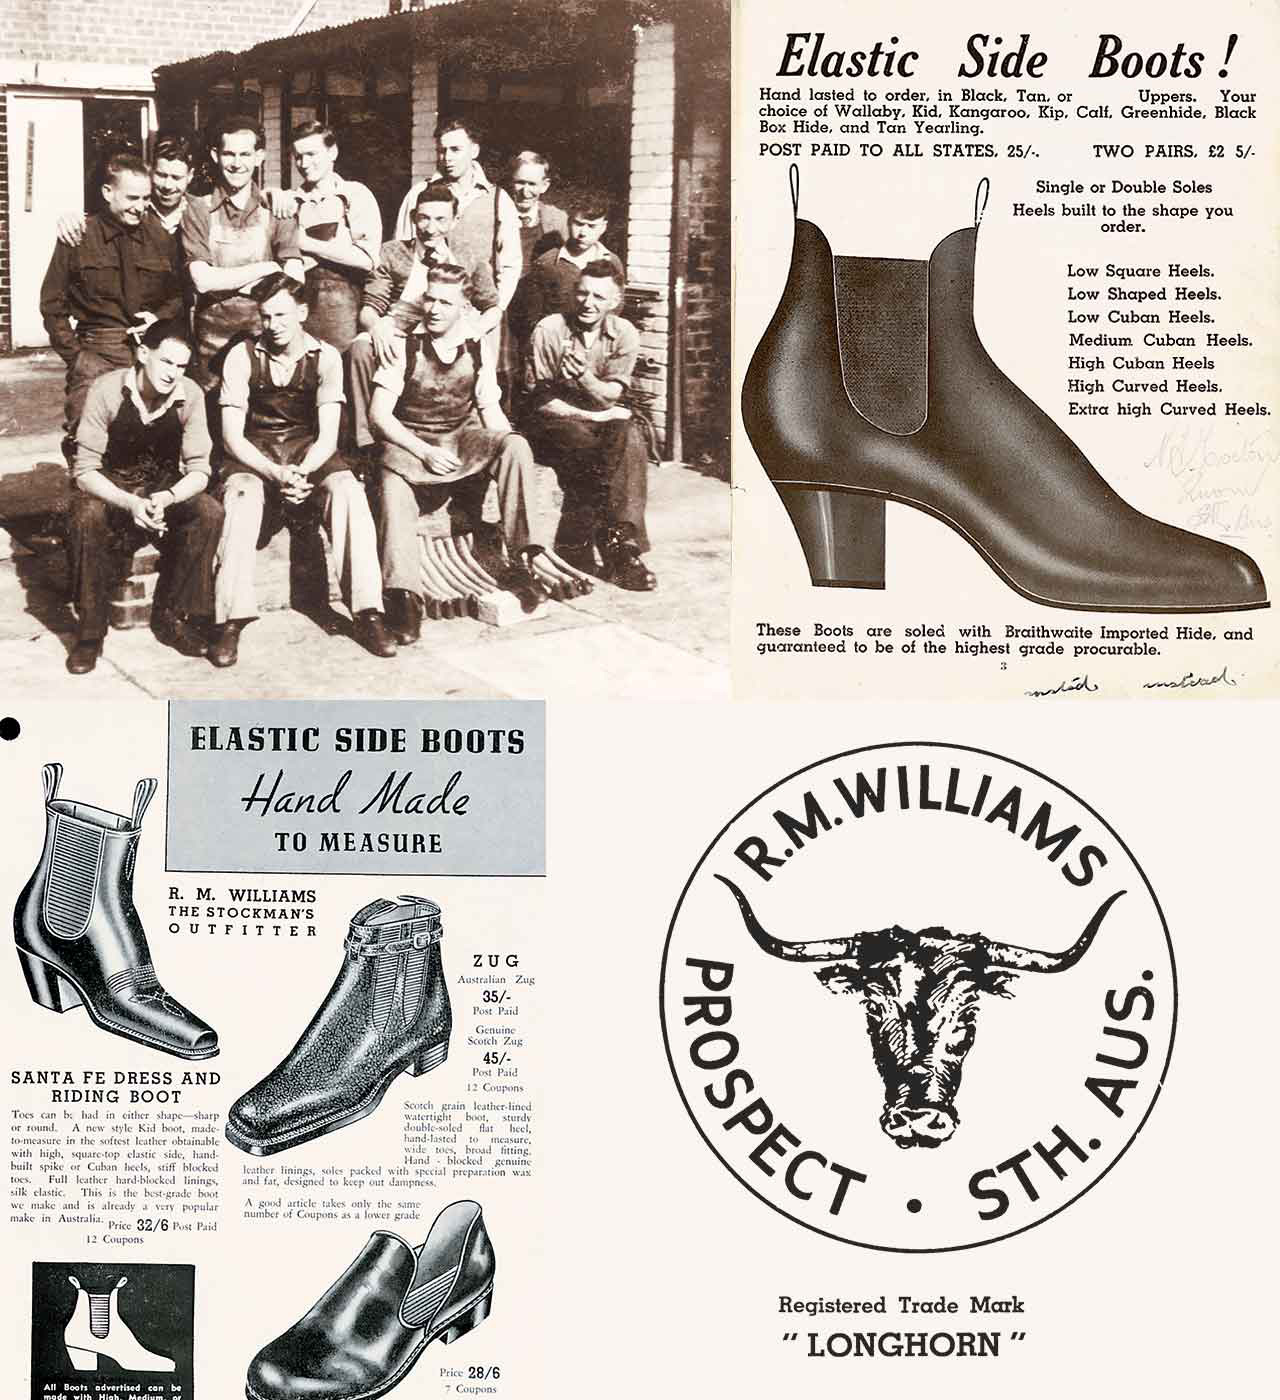 What's your R.M. Williams boot of choice? We have a wide range for